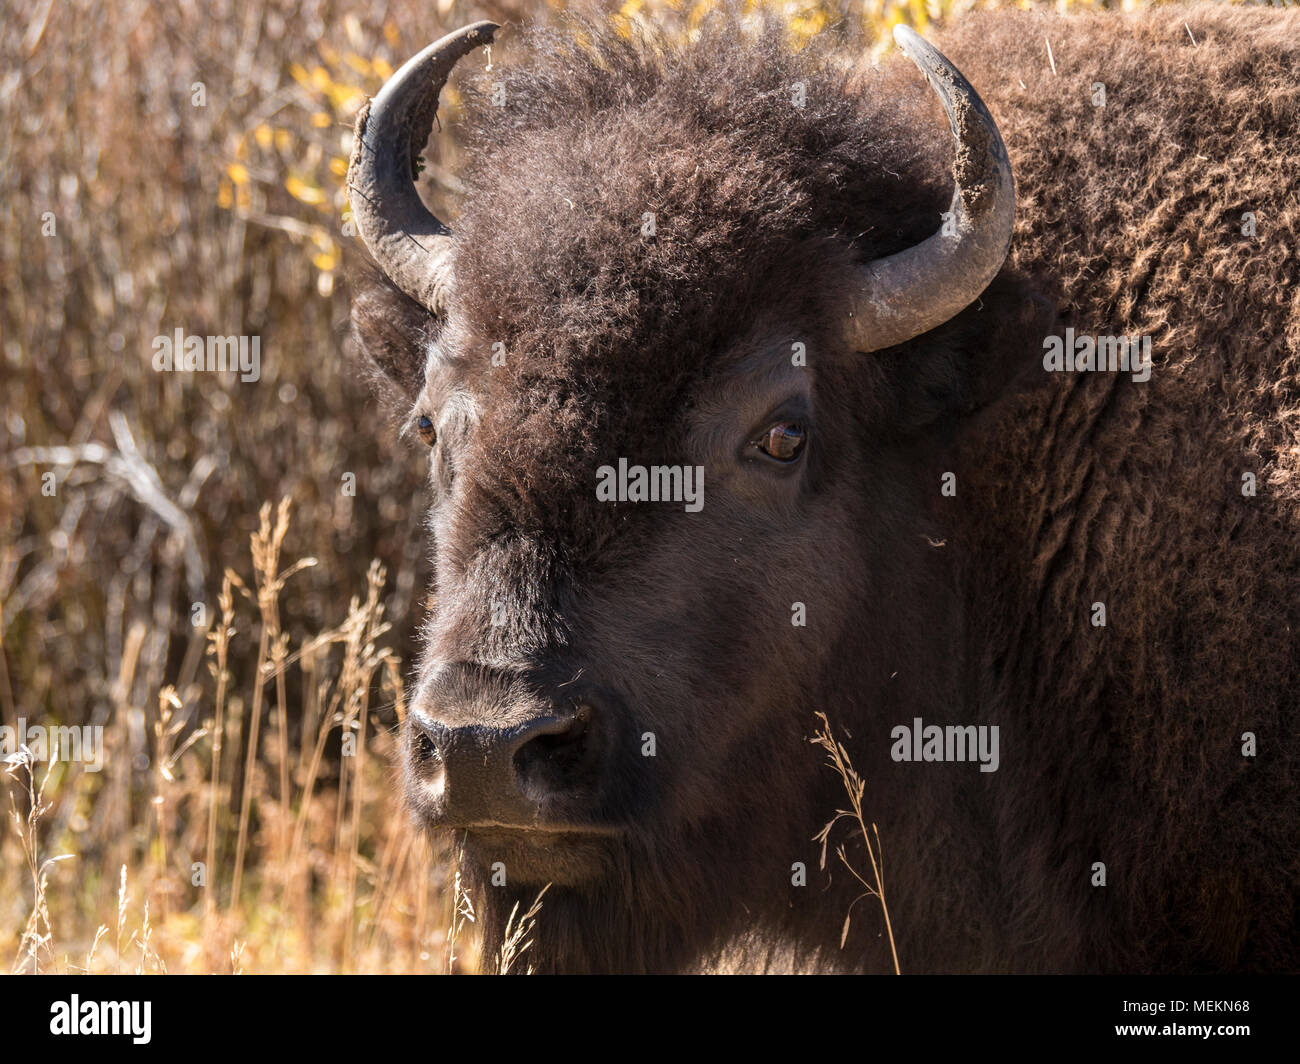 Bull Bison staring at the camera Stock Photo